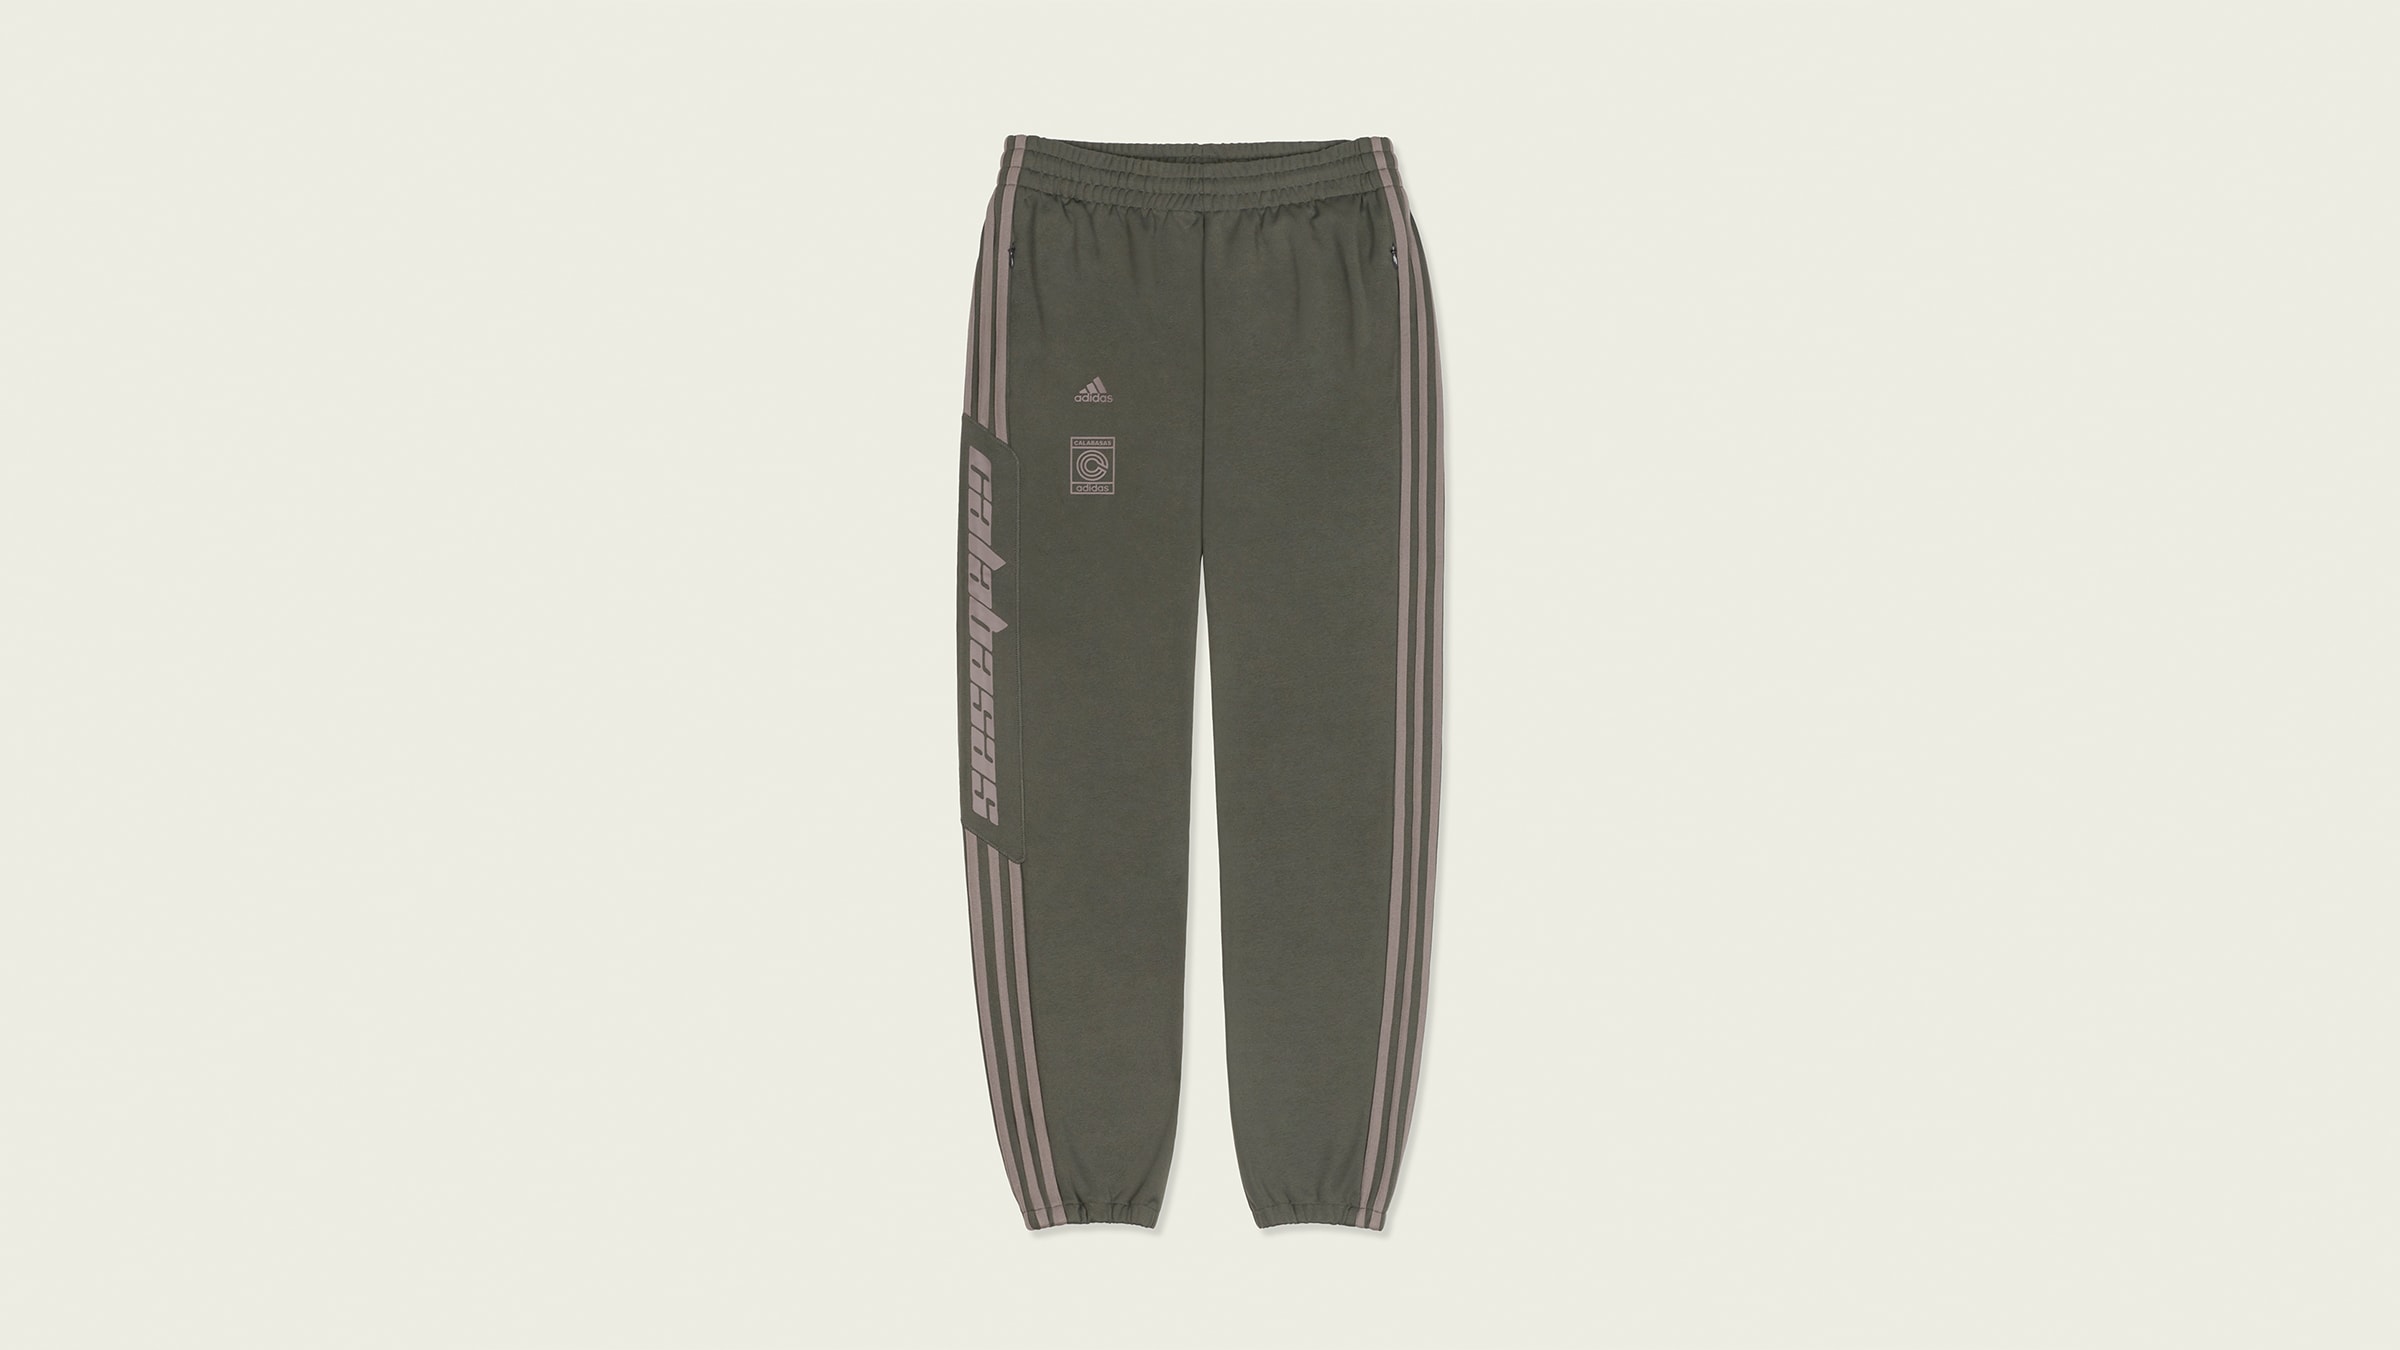 Adidas Yeezy Calabasas Track Pant (Core & Mink) | END. Launches